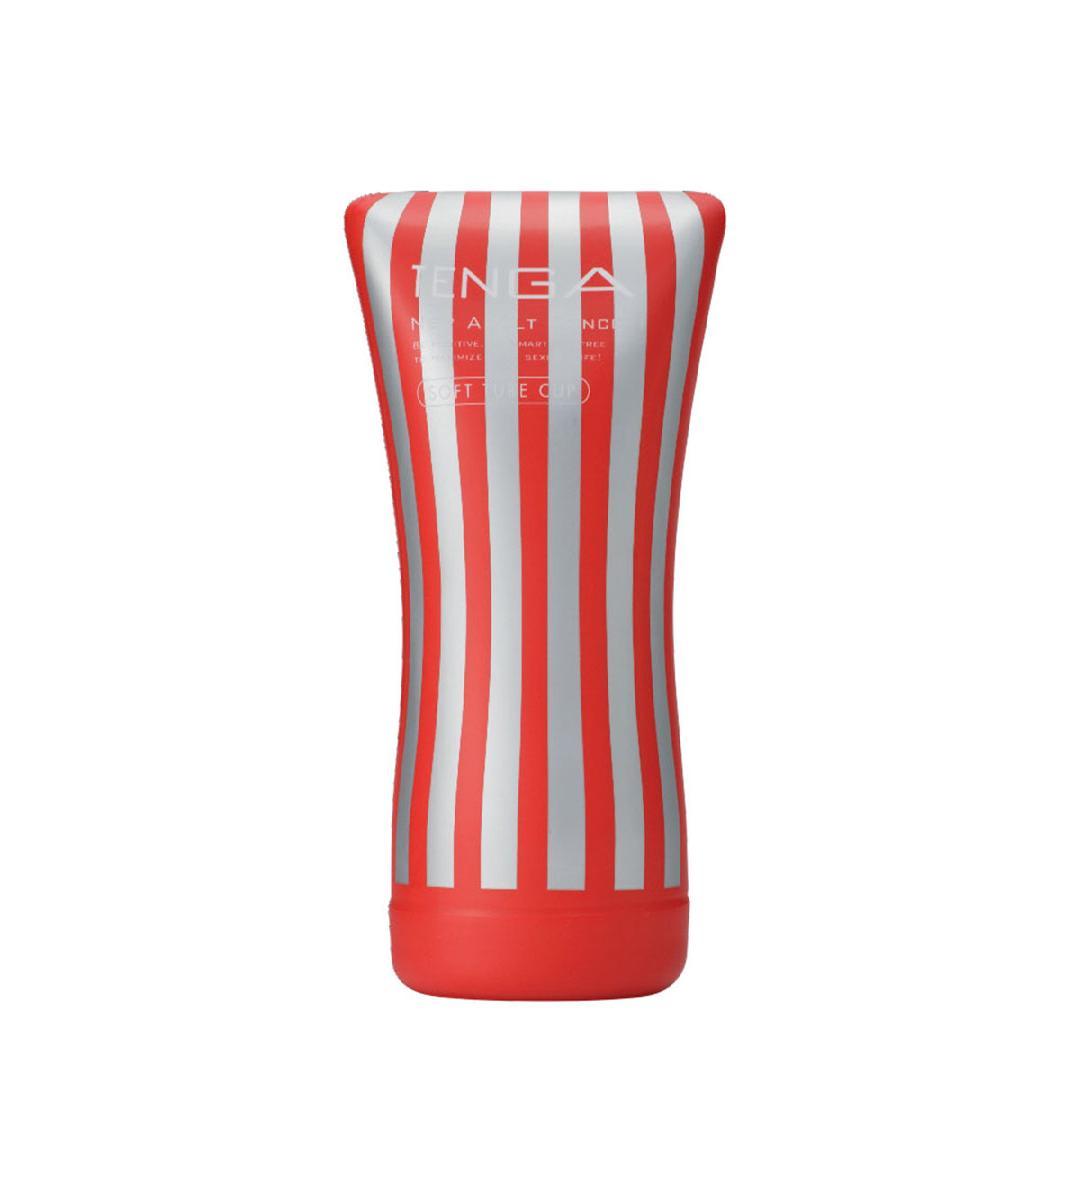 Tenga Standard Soft Tube Cup - Buy At Luxury Toy X - Free 3-Day Shipping